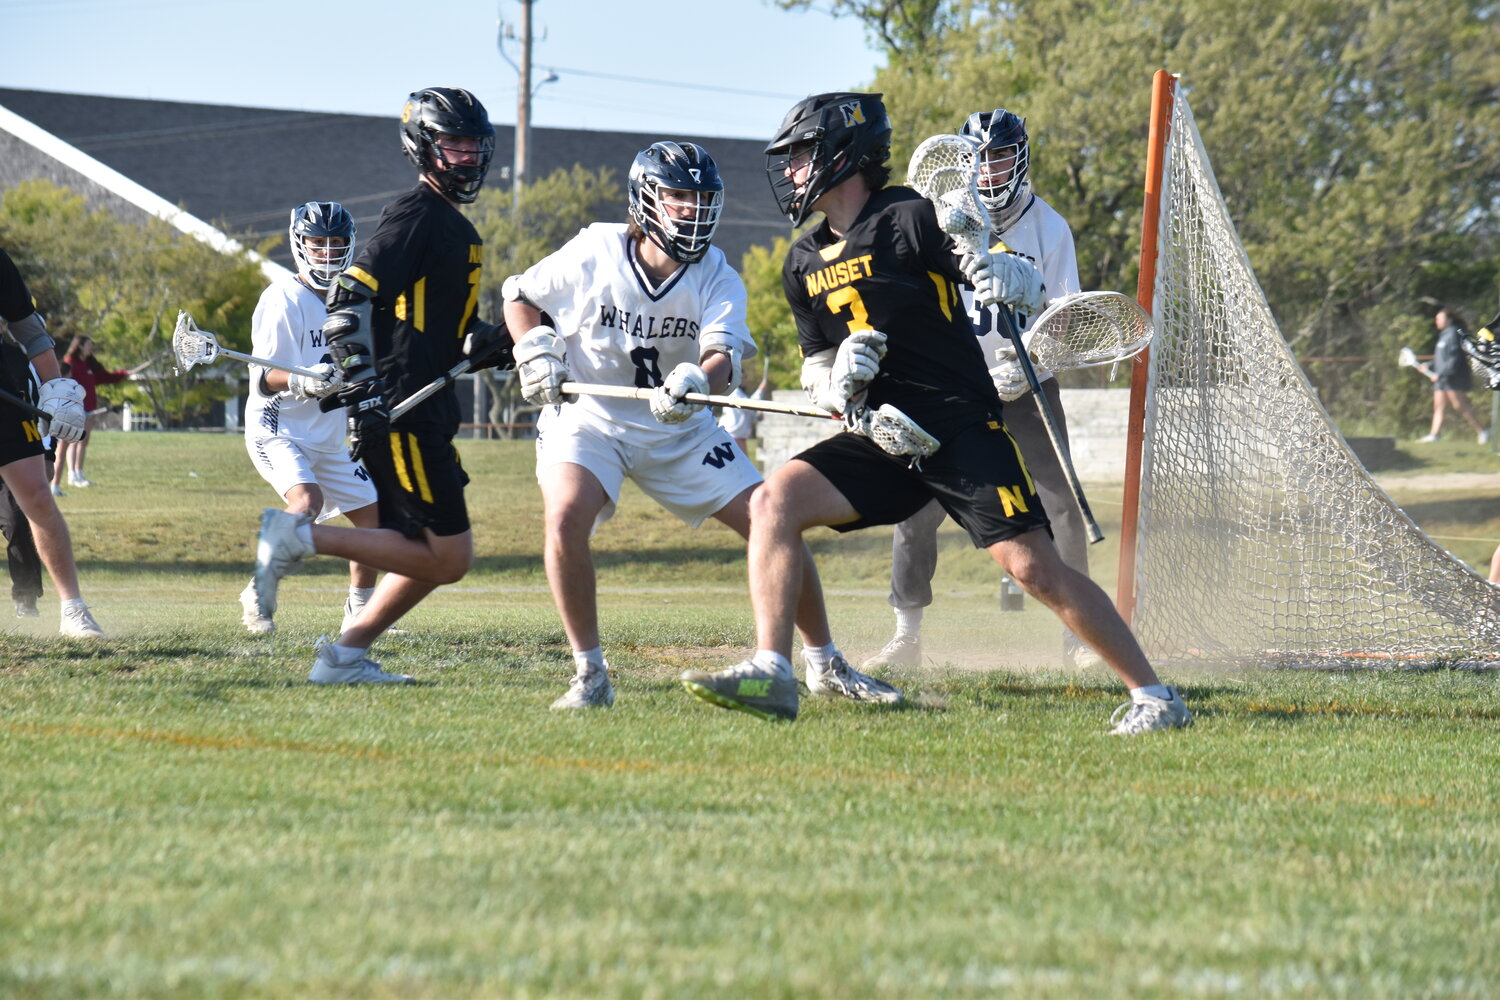 Griffin Starr defends against a Nauset player.